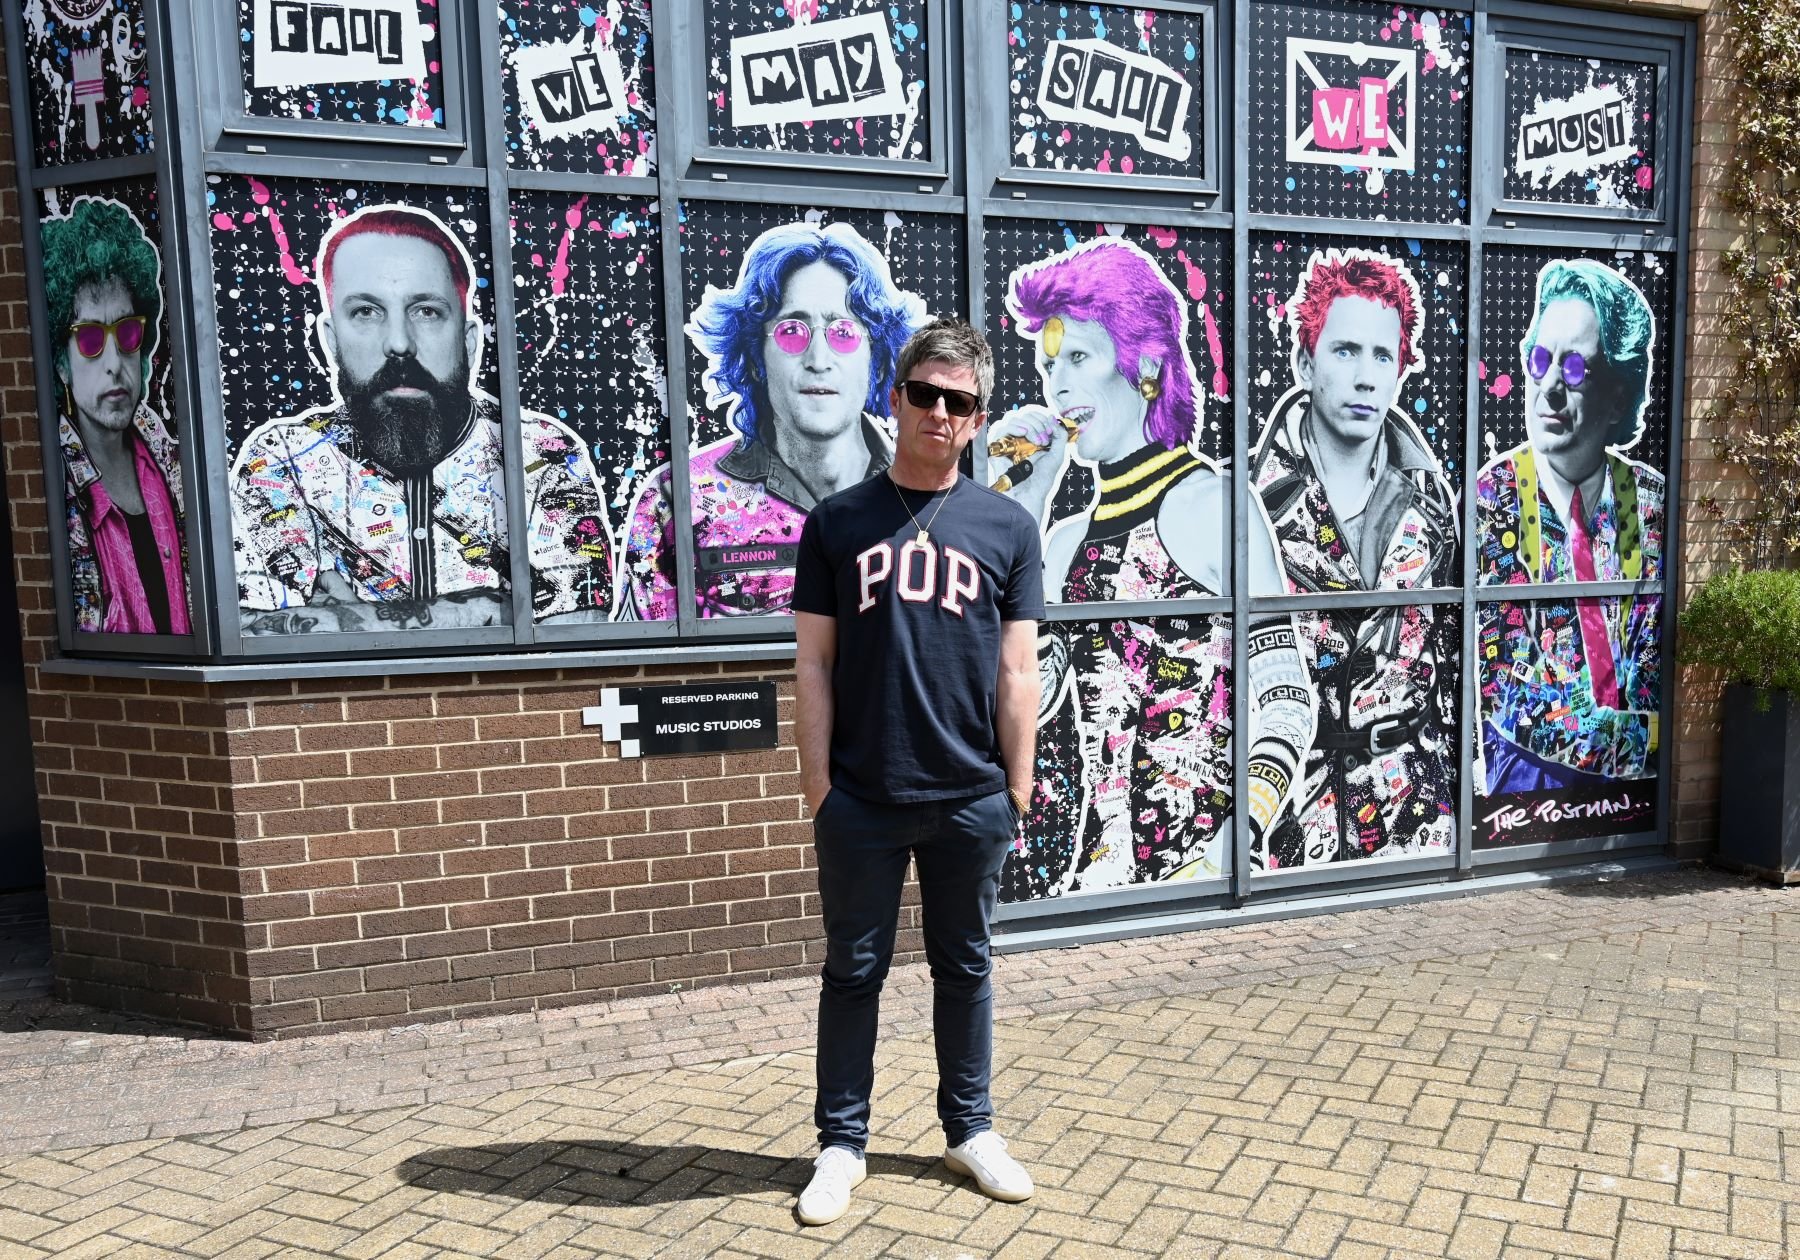 Noel Gallagher posing at completed The Postman art mural in London, England